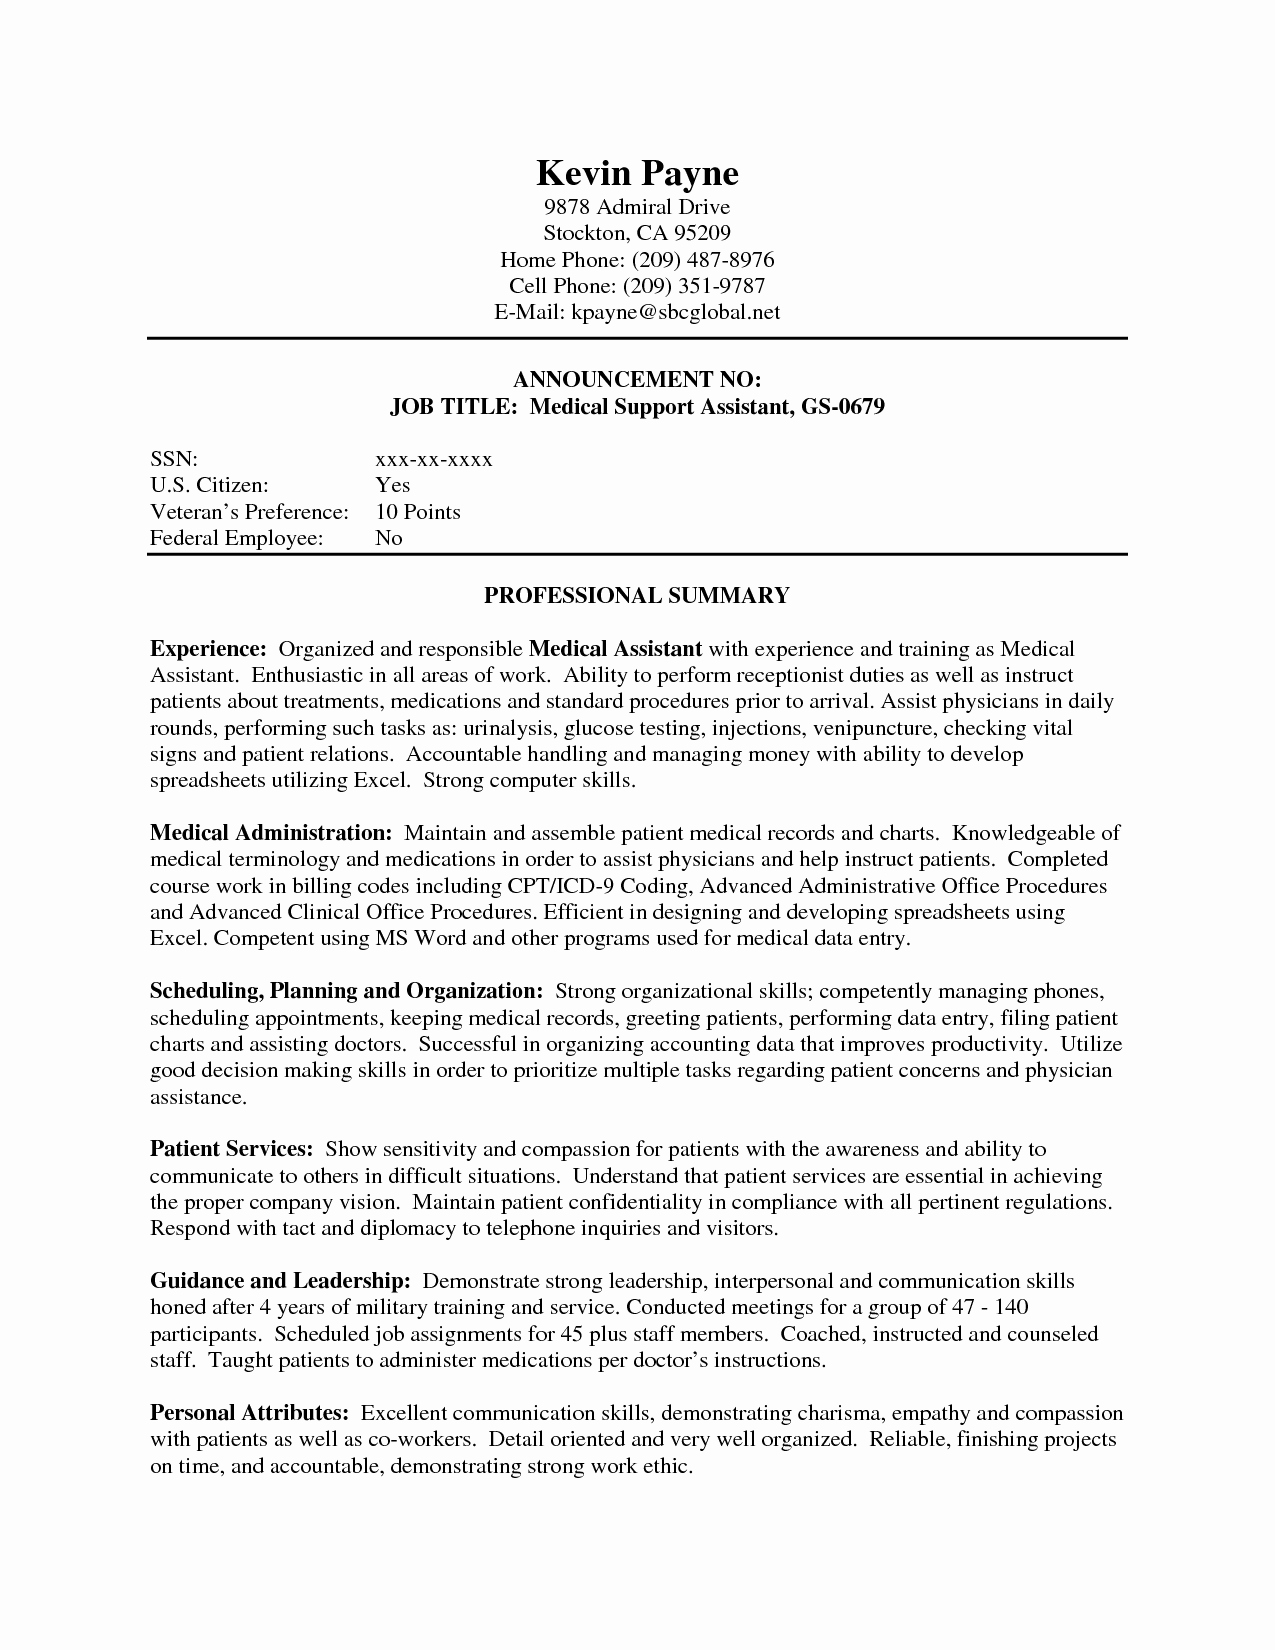 Medical assistant Resume Template Best Of Resume for Medical assistant with No Experience Resume Ideas